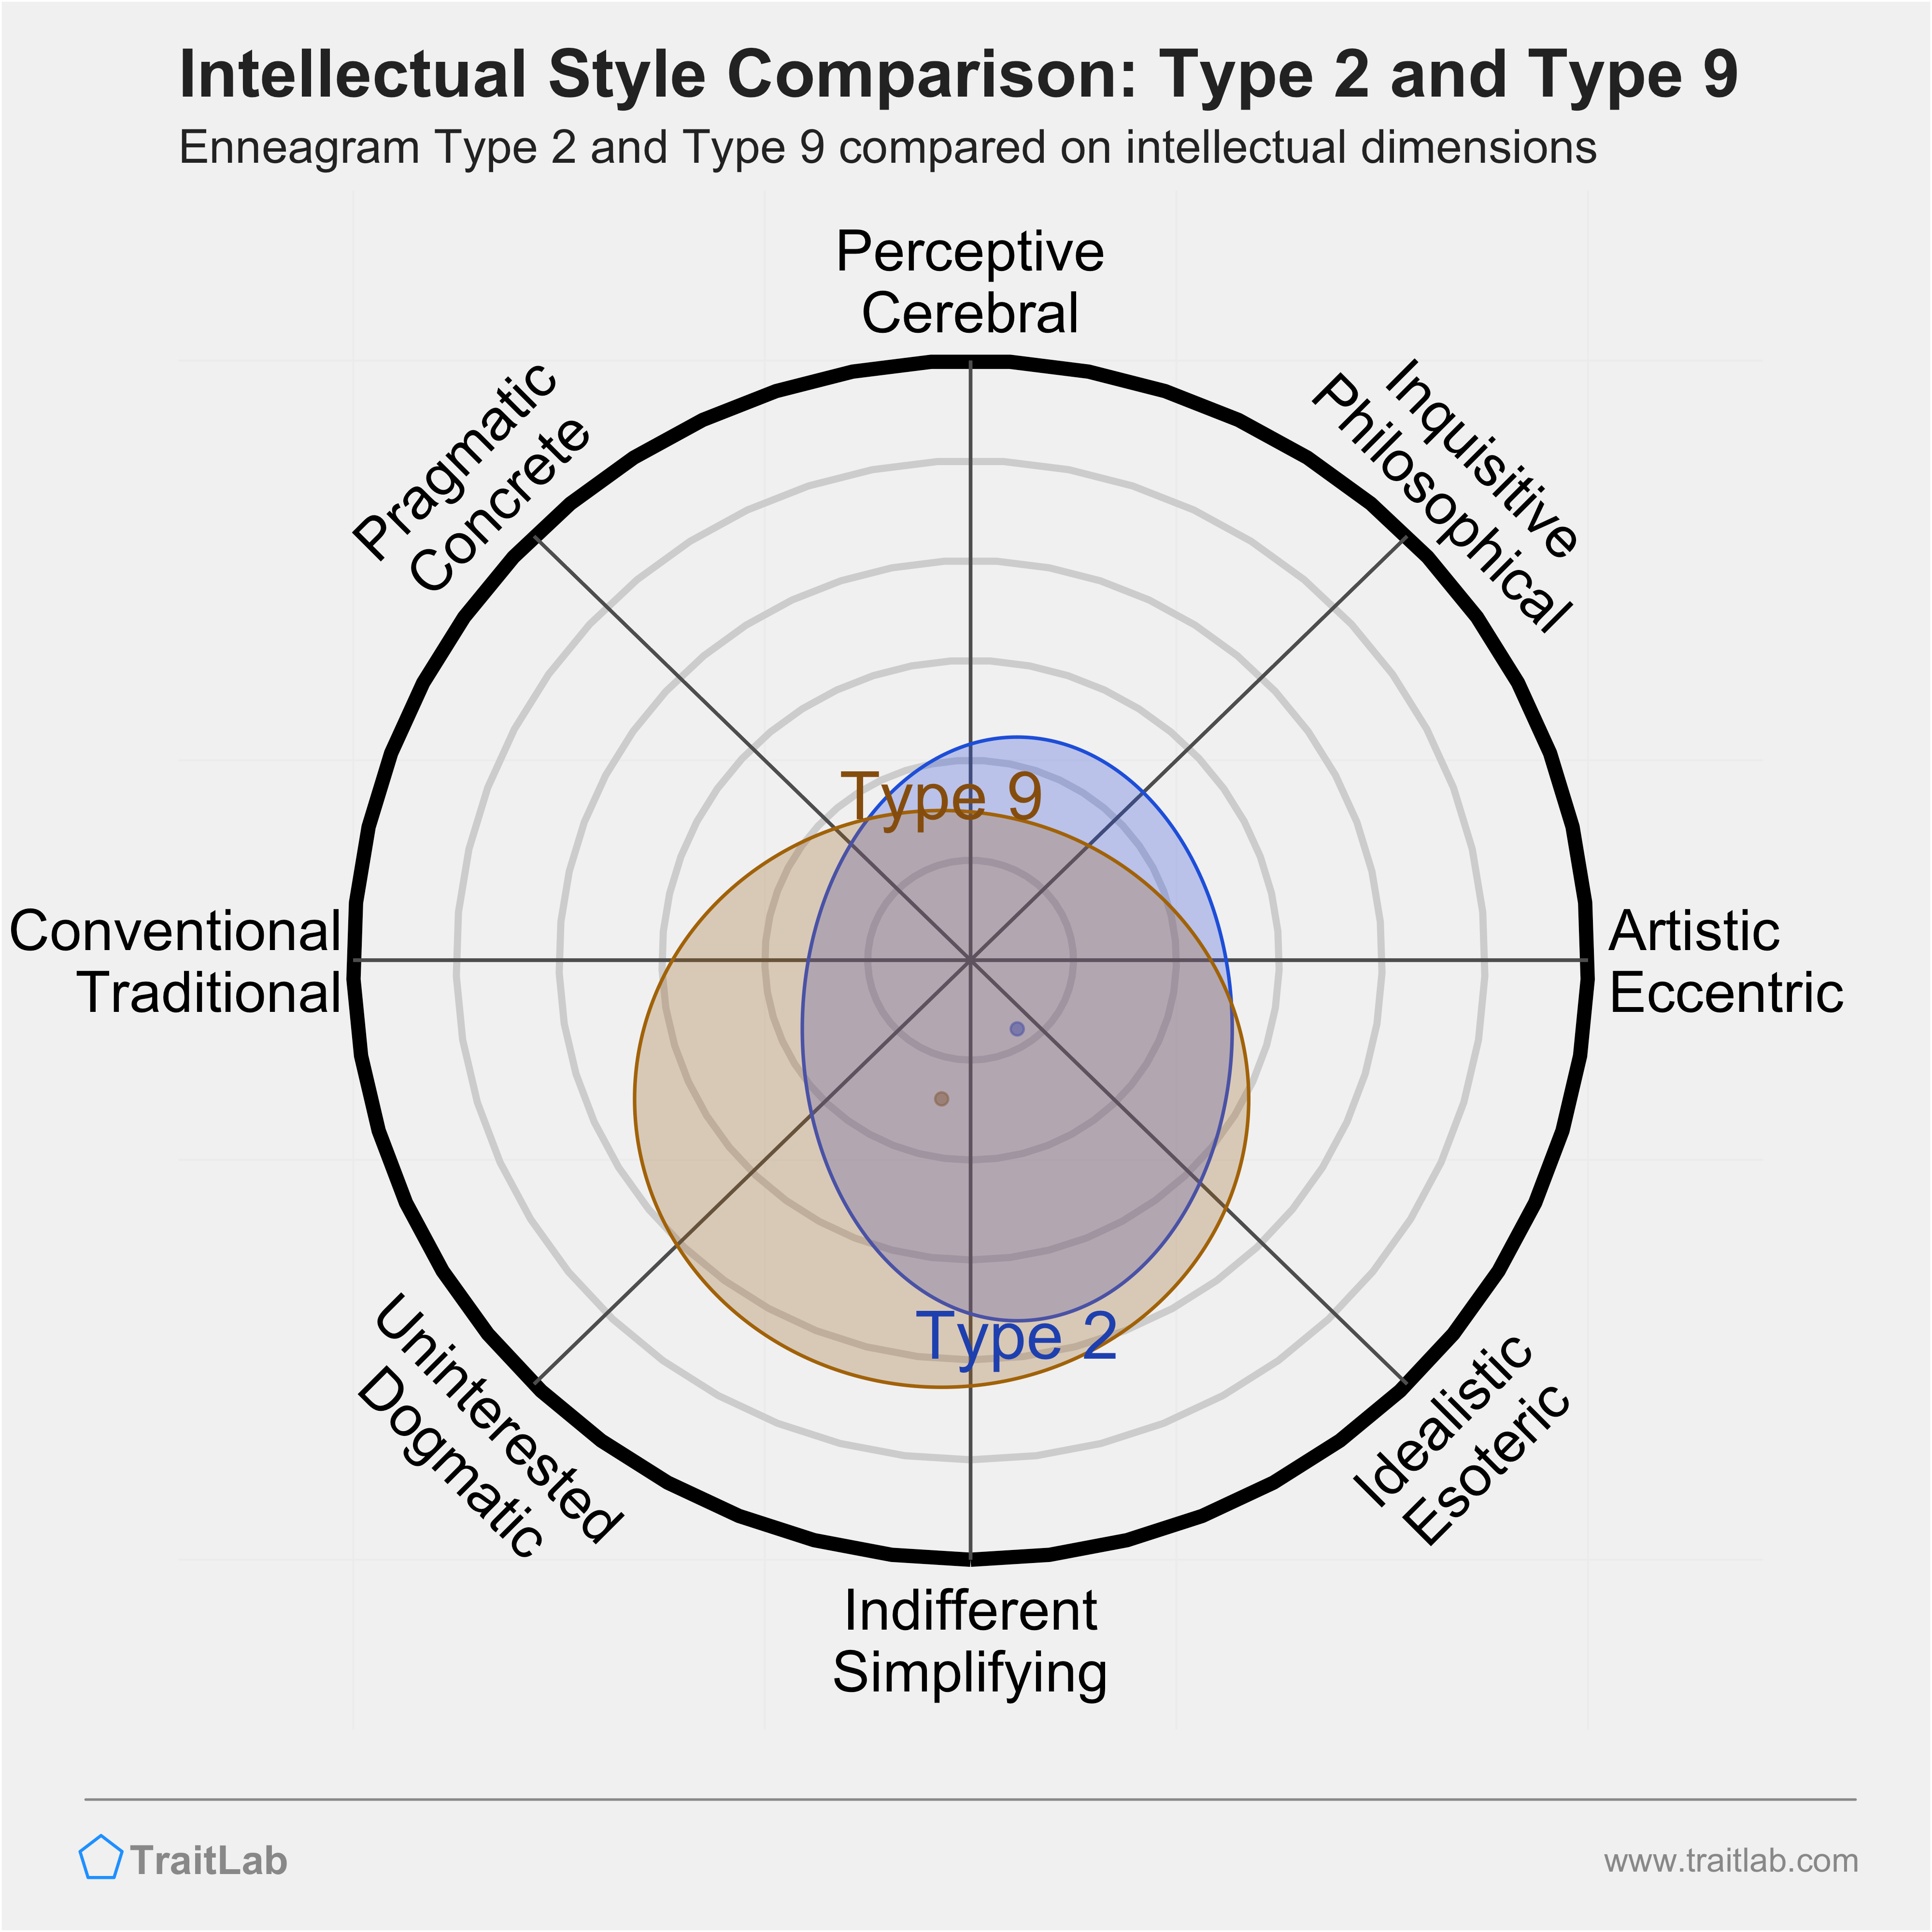 Type 2 and Type 9 comparison across intellectual dimensions